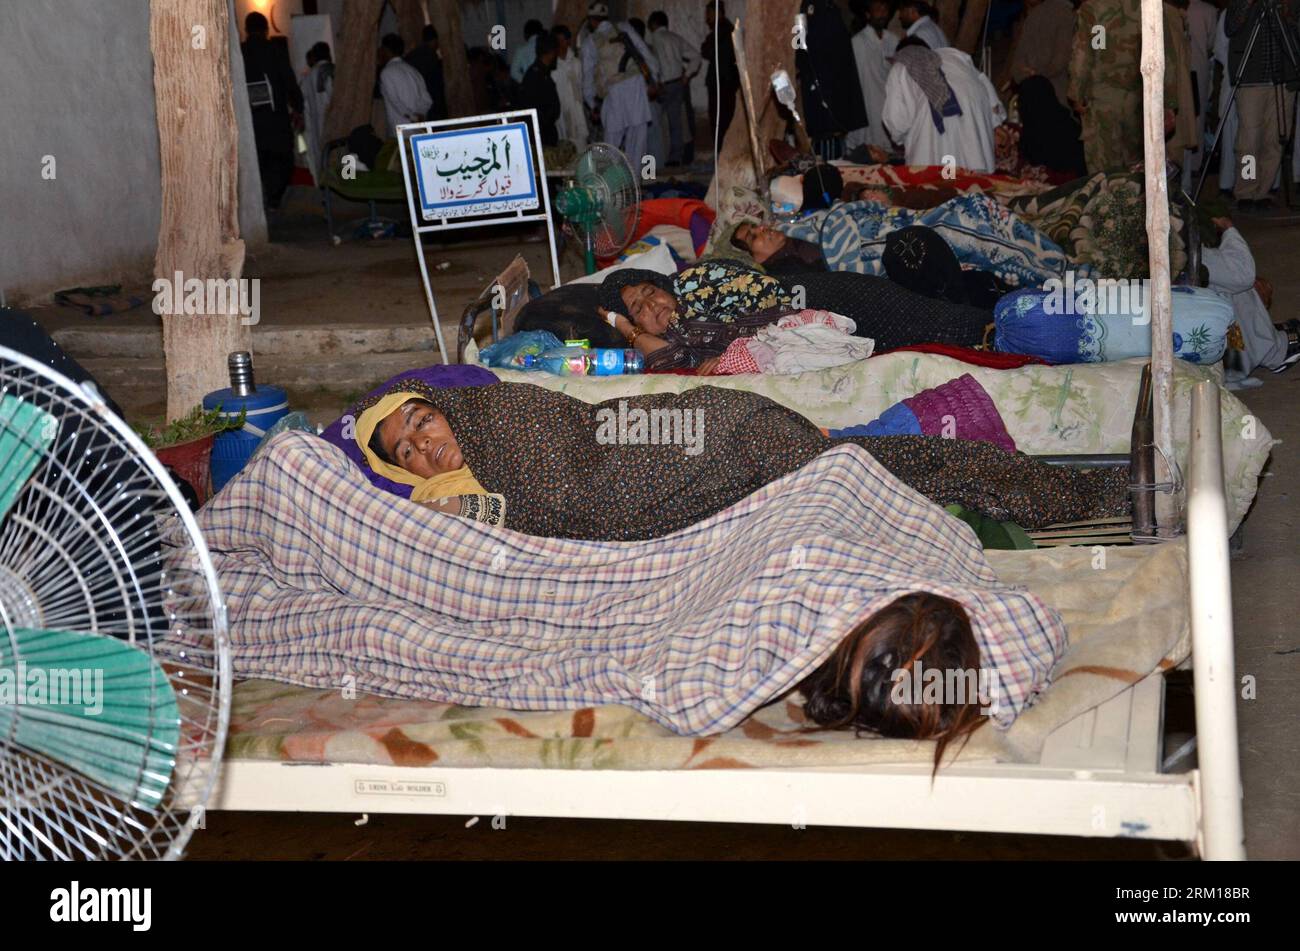 Bildnummer: 59536895  Datum: 17.04.2013  Copyright: imago/Xinhua (130418) -- MASHKEL, April 18, 2013 (Xinhua) -- Injured Pakistani earthquake survivors are treated at a military field hospital in the quake-hit area of southwest Pakistan s Mashkel on April 17, 2013. The Pakistani authorities on Thursday said that rescue operations had been sped up in areas affected by the Tuesday s 7.9 magnitude earthquake in the country s southwestern province of Balochistan near Pak-Iran border. According to the official figures, at least 40 were killed and over 300 others injured when tremors jolted the Mash Stock Photo